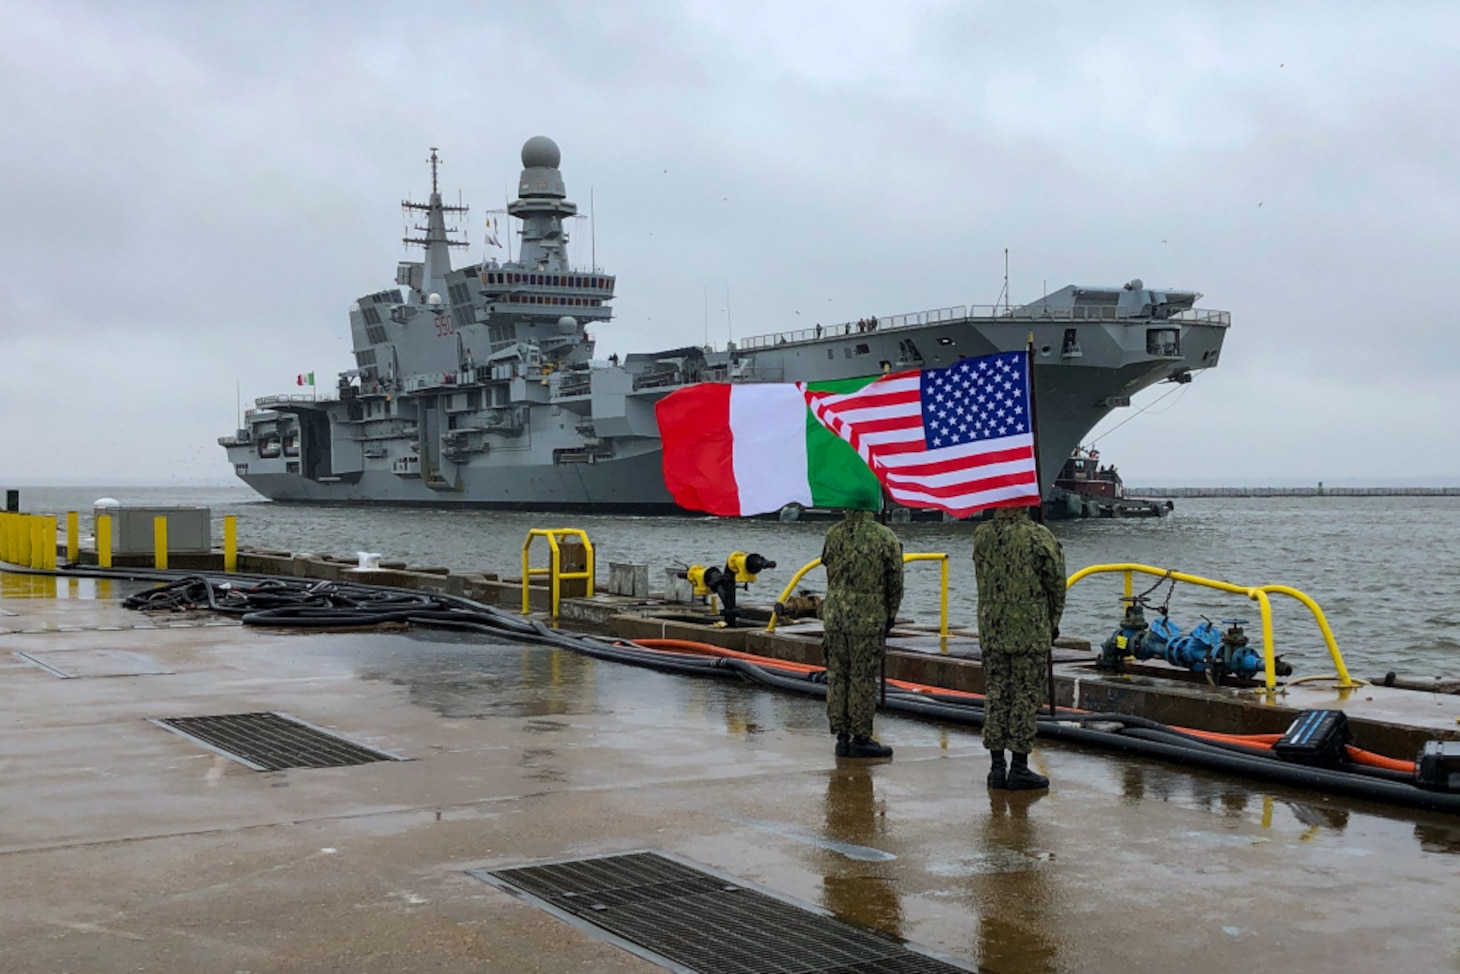 U.S. Sailors, assigned to the aircraft carrier USS John C. Stennis (CVN 74), greet the Italian Navy flagship, aircraft carrier ITS Cavour (CVH 550), as it arrives at Naval Station Norfolk, Virginia, Feb. 13, 2021. The Cavour’s visit is part of a series of operations alongside U.S. military assets to attain the Italian Navy’s “Ready for Operations” certification to safely land and launch F-35B aircraft, U.S. 2nd Fleet exercises operational authorities over assigned ships, and landing forces on the East Coast and the Atlantic.